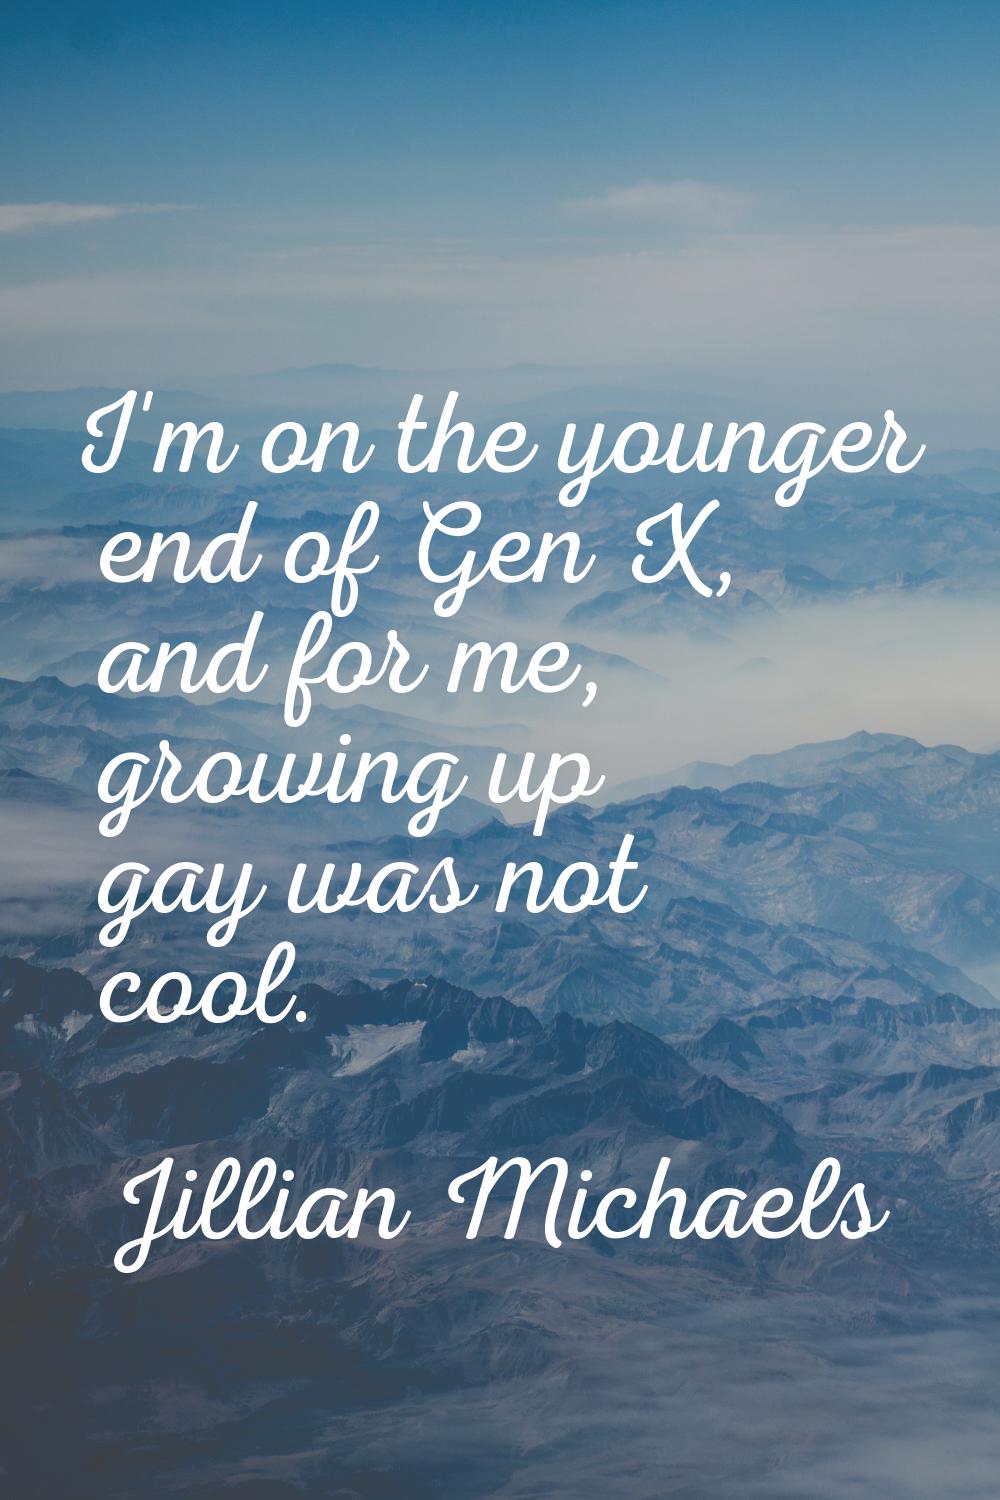 I'm on the younger end of Gen X, and for me, growing up gay was not cool.